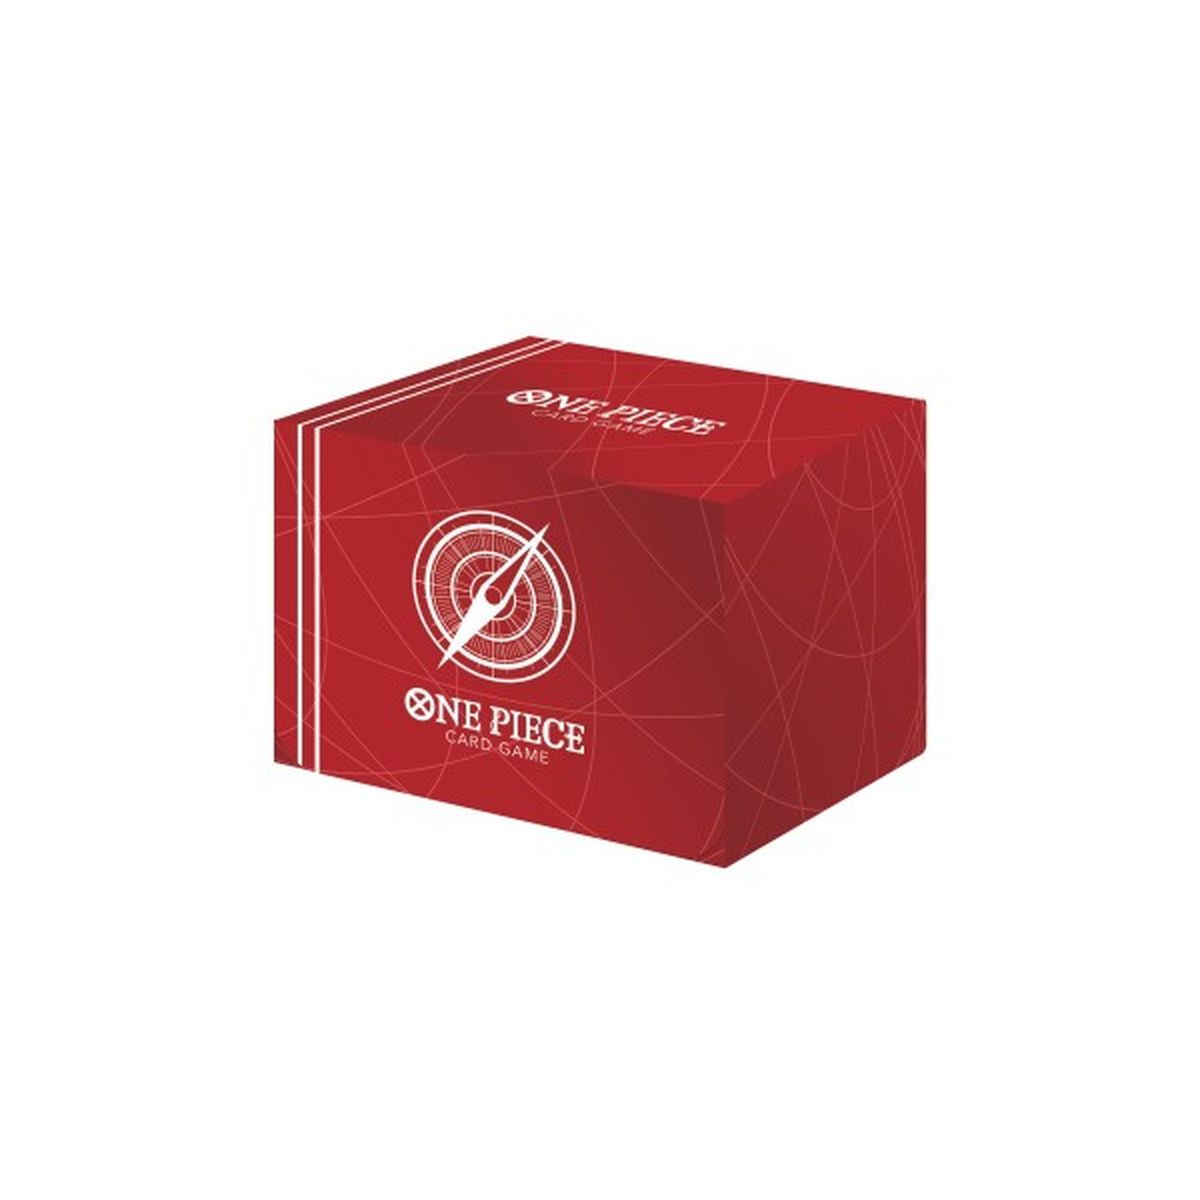 One Piece - Clear Card Case Deck Box - Red - Sealed